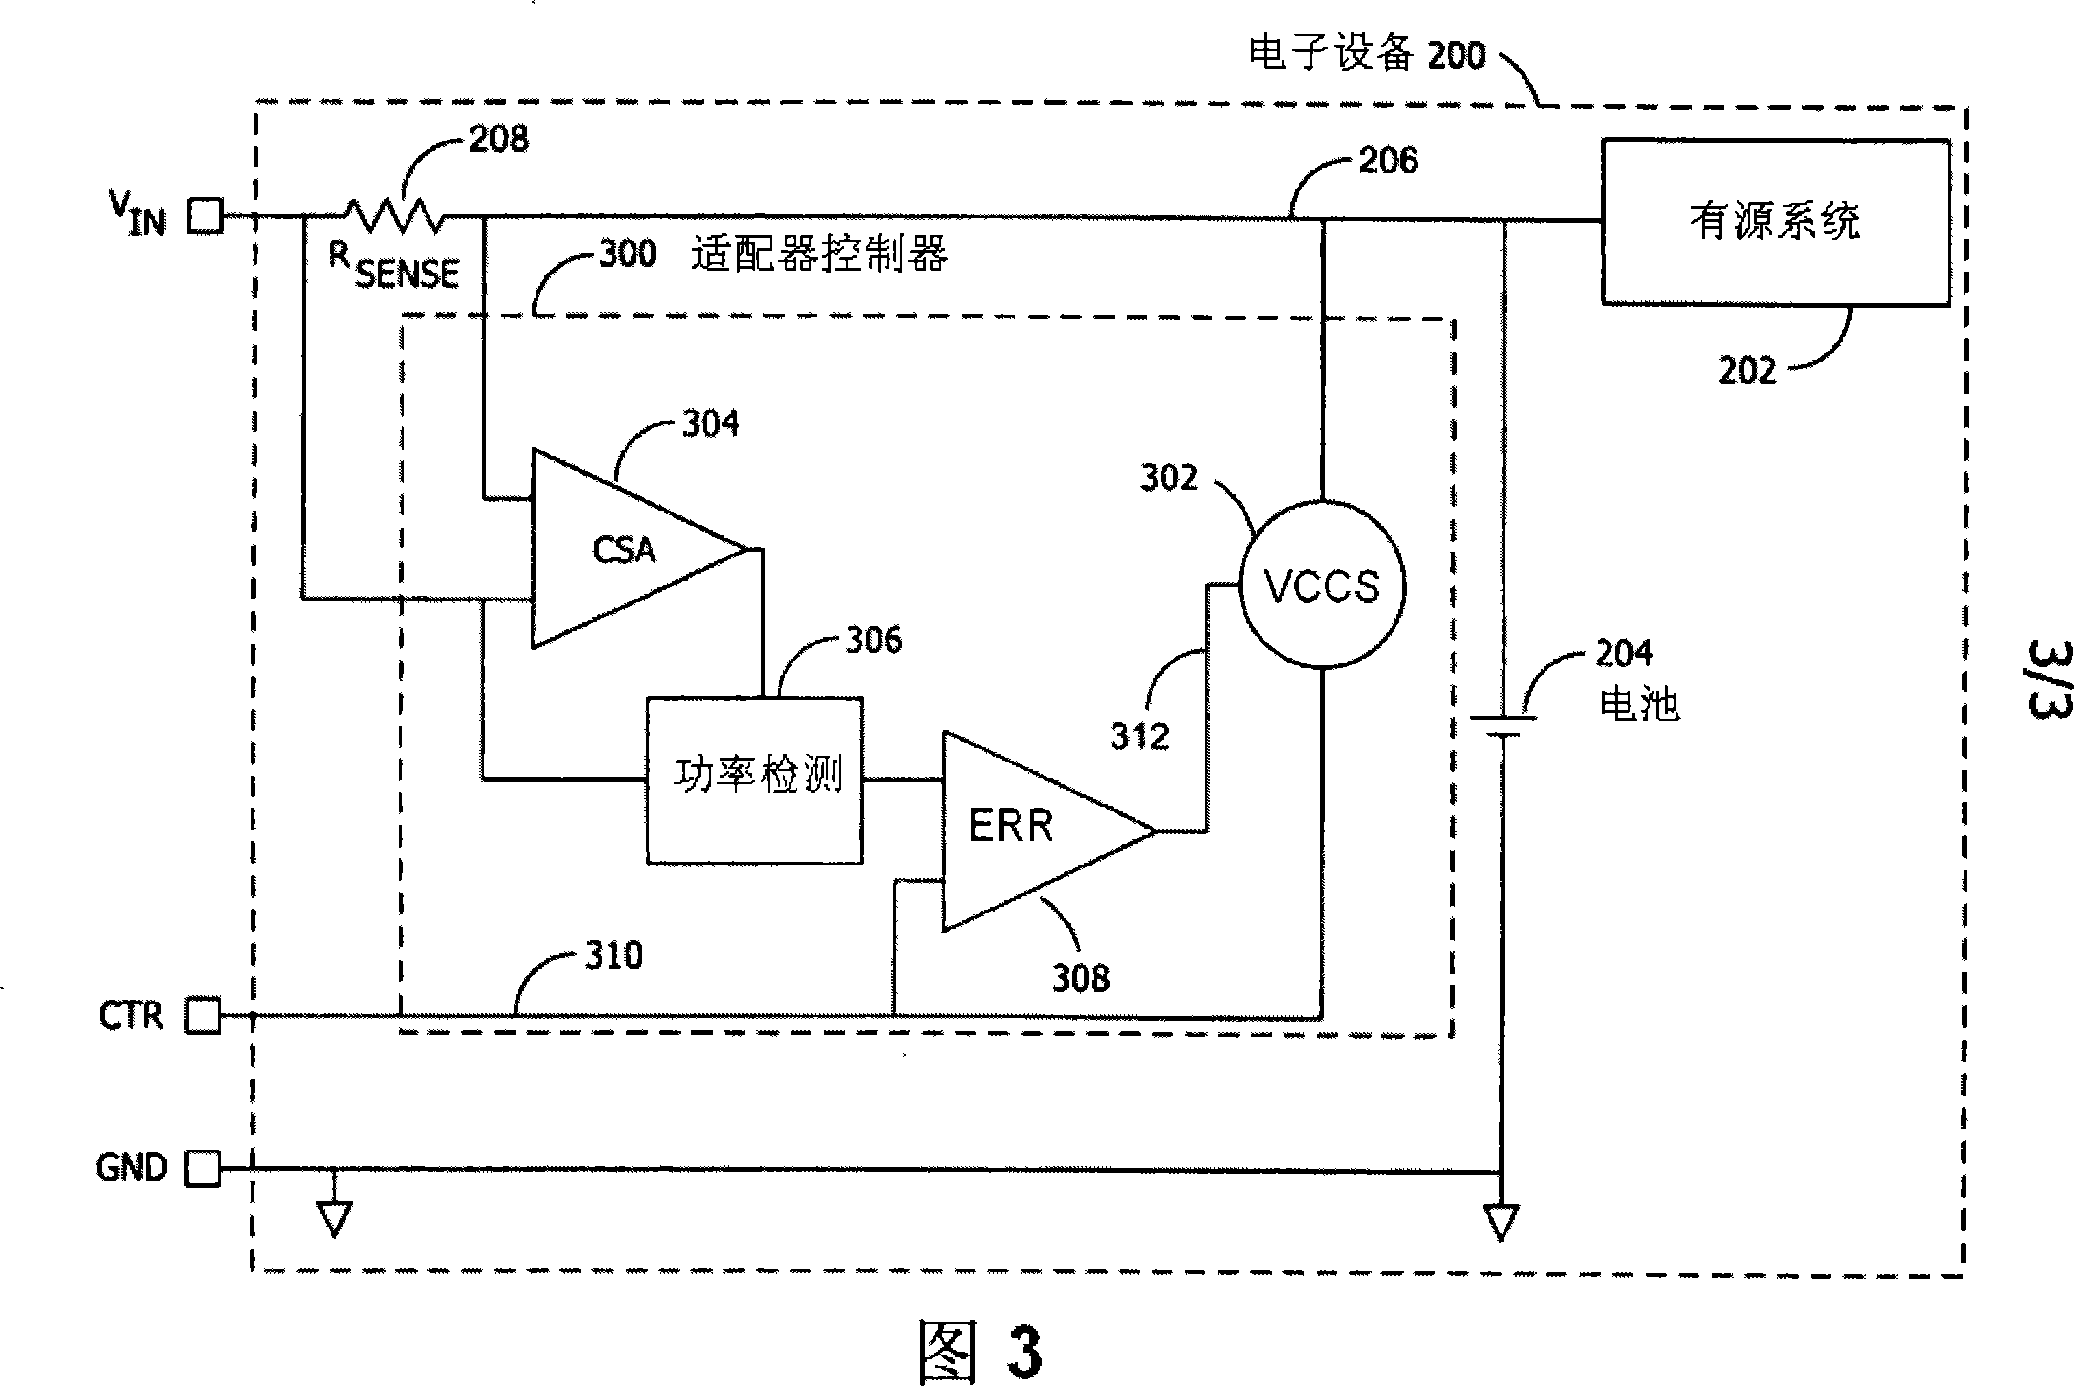 Power supply topology with power limiting feedback loop